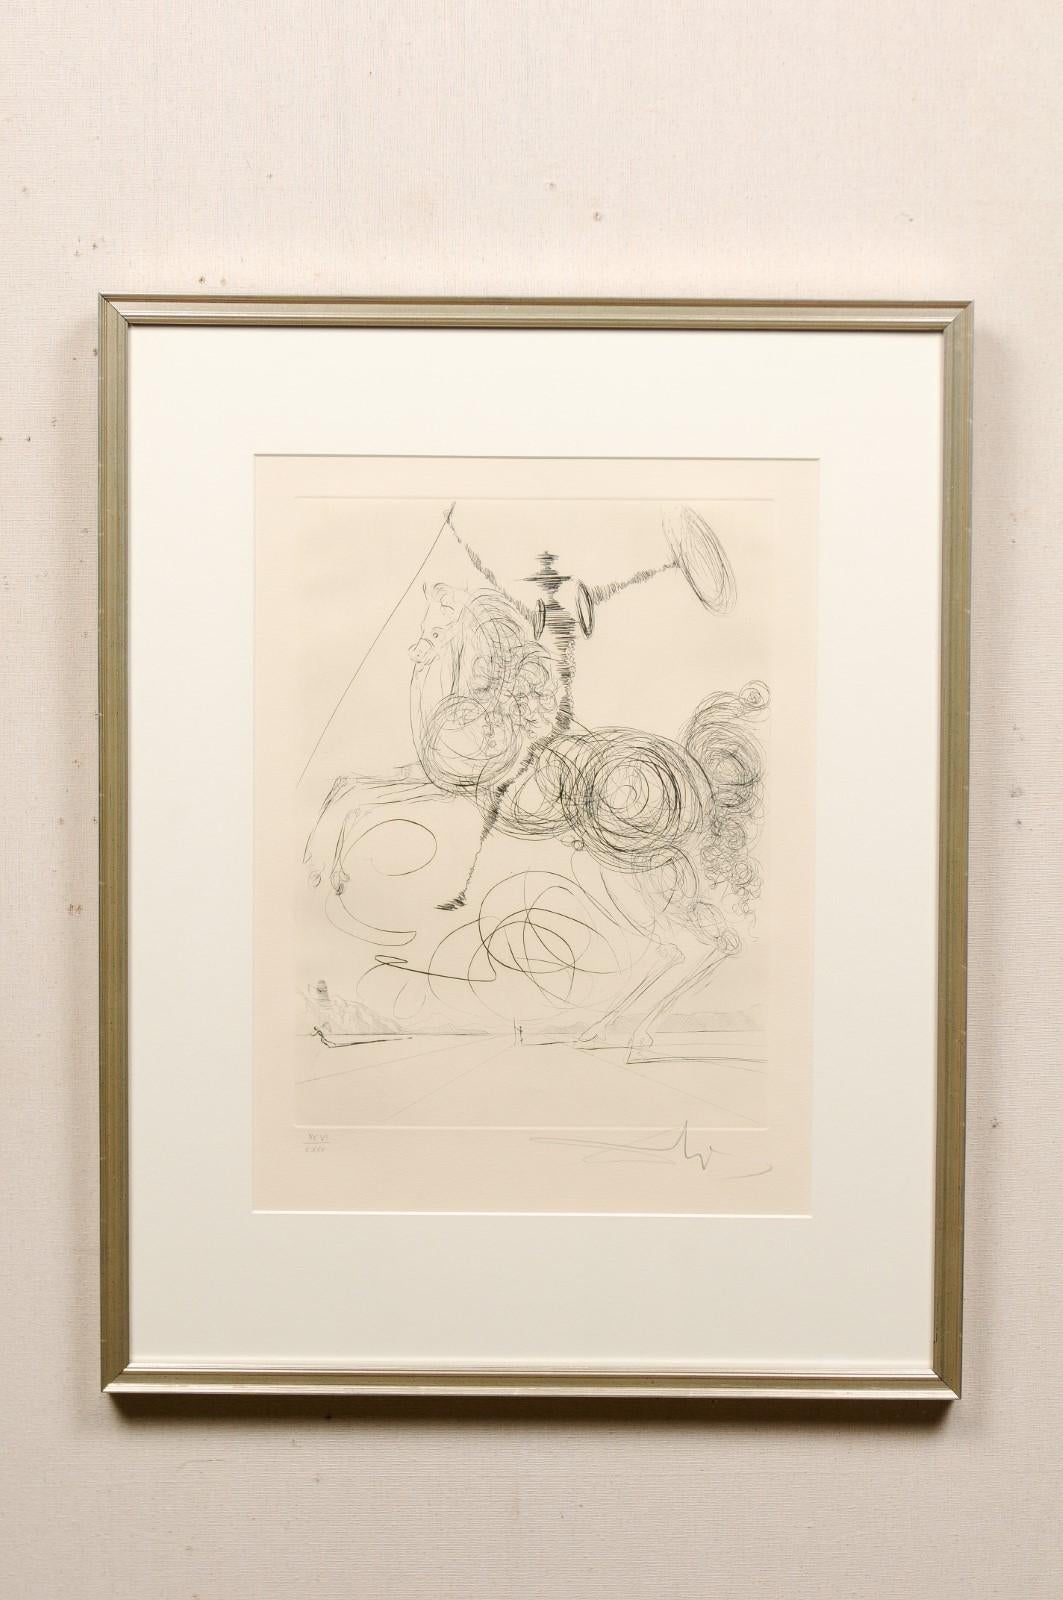 An etching of Salvador Dali's Don Quichotte (Horseman), a signed and numbered edition, presented within a custom silver frame. This sketch by Salvador Dali (Spain, 1904-1989), perhaps the world's most prominent surrealist artist, depicts the famous